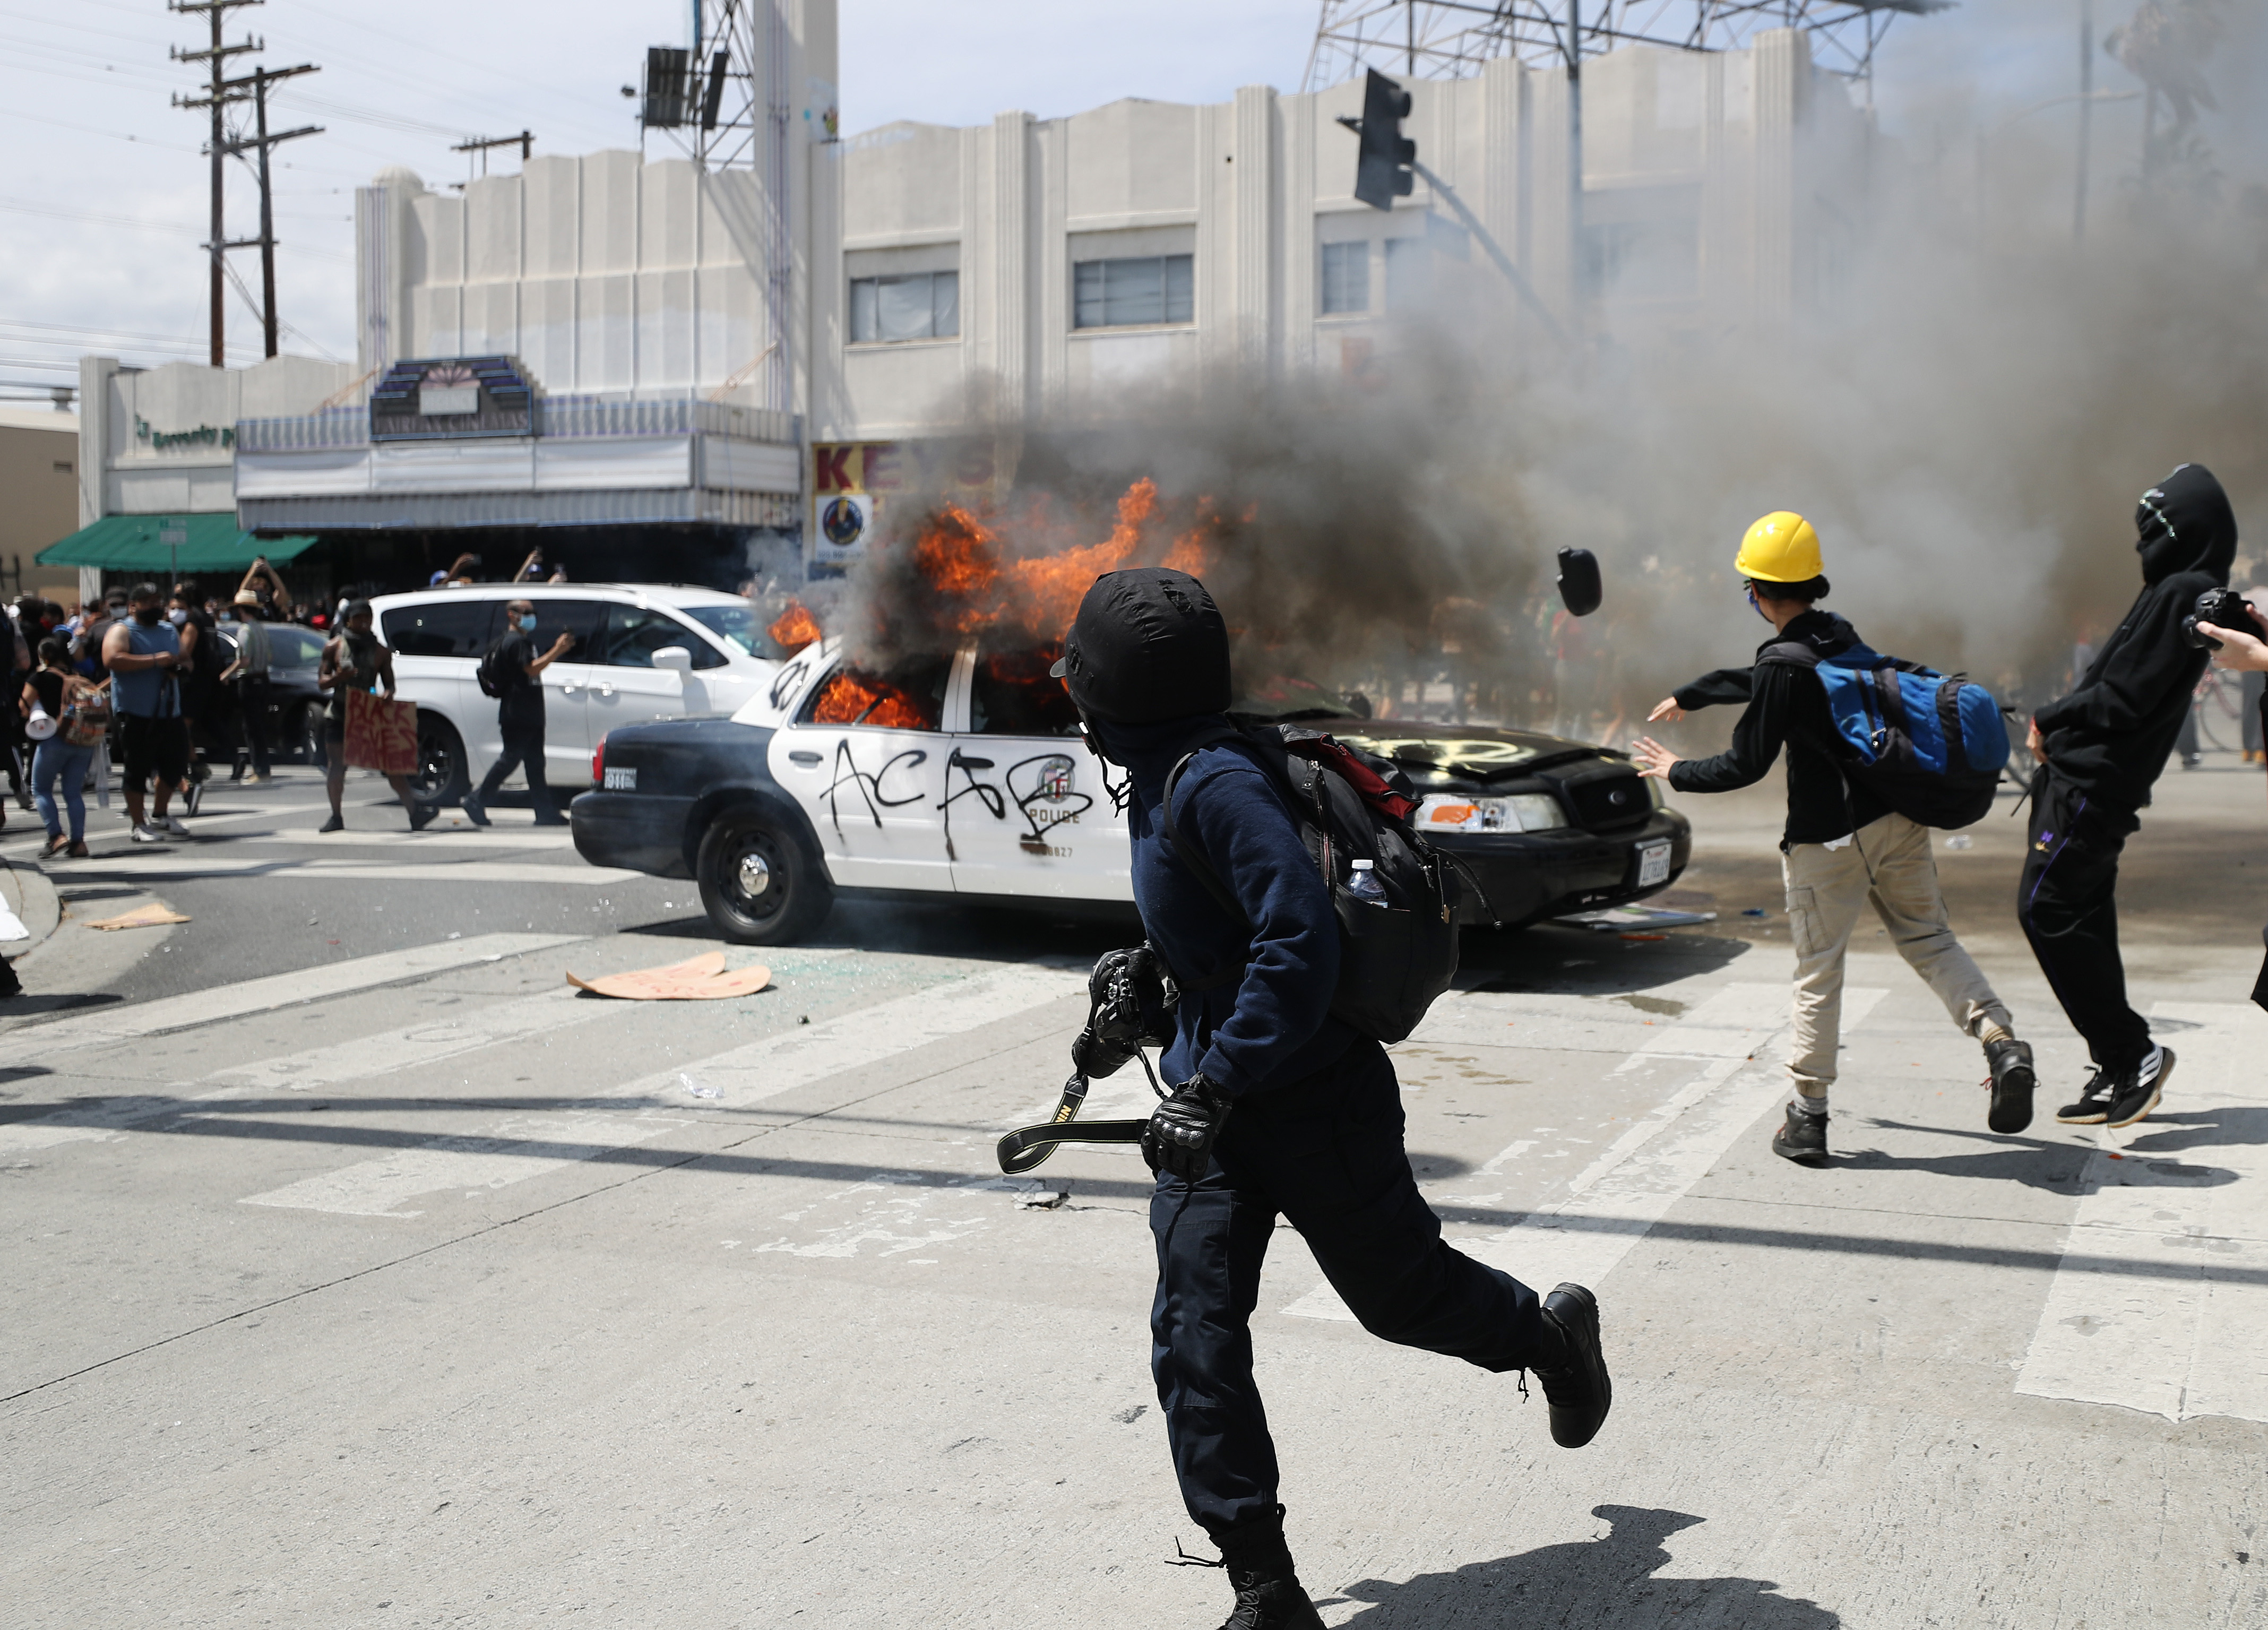 L.A. Mayor Imposes Curfew Following Protests Over Dead Of George Floyd